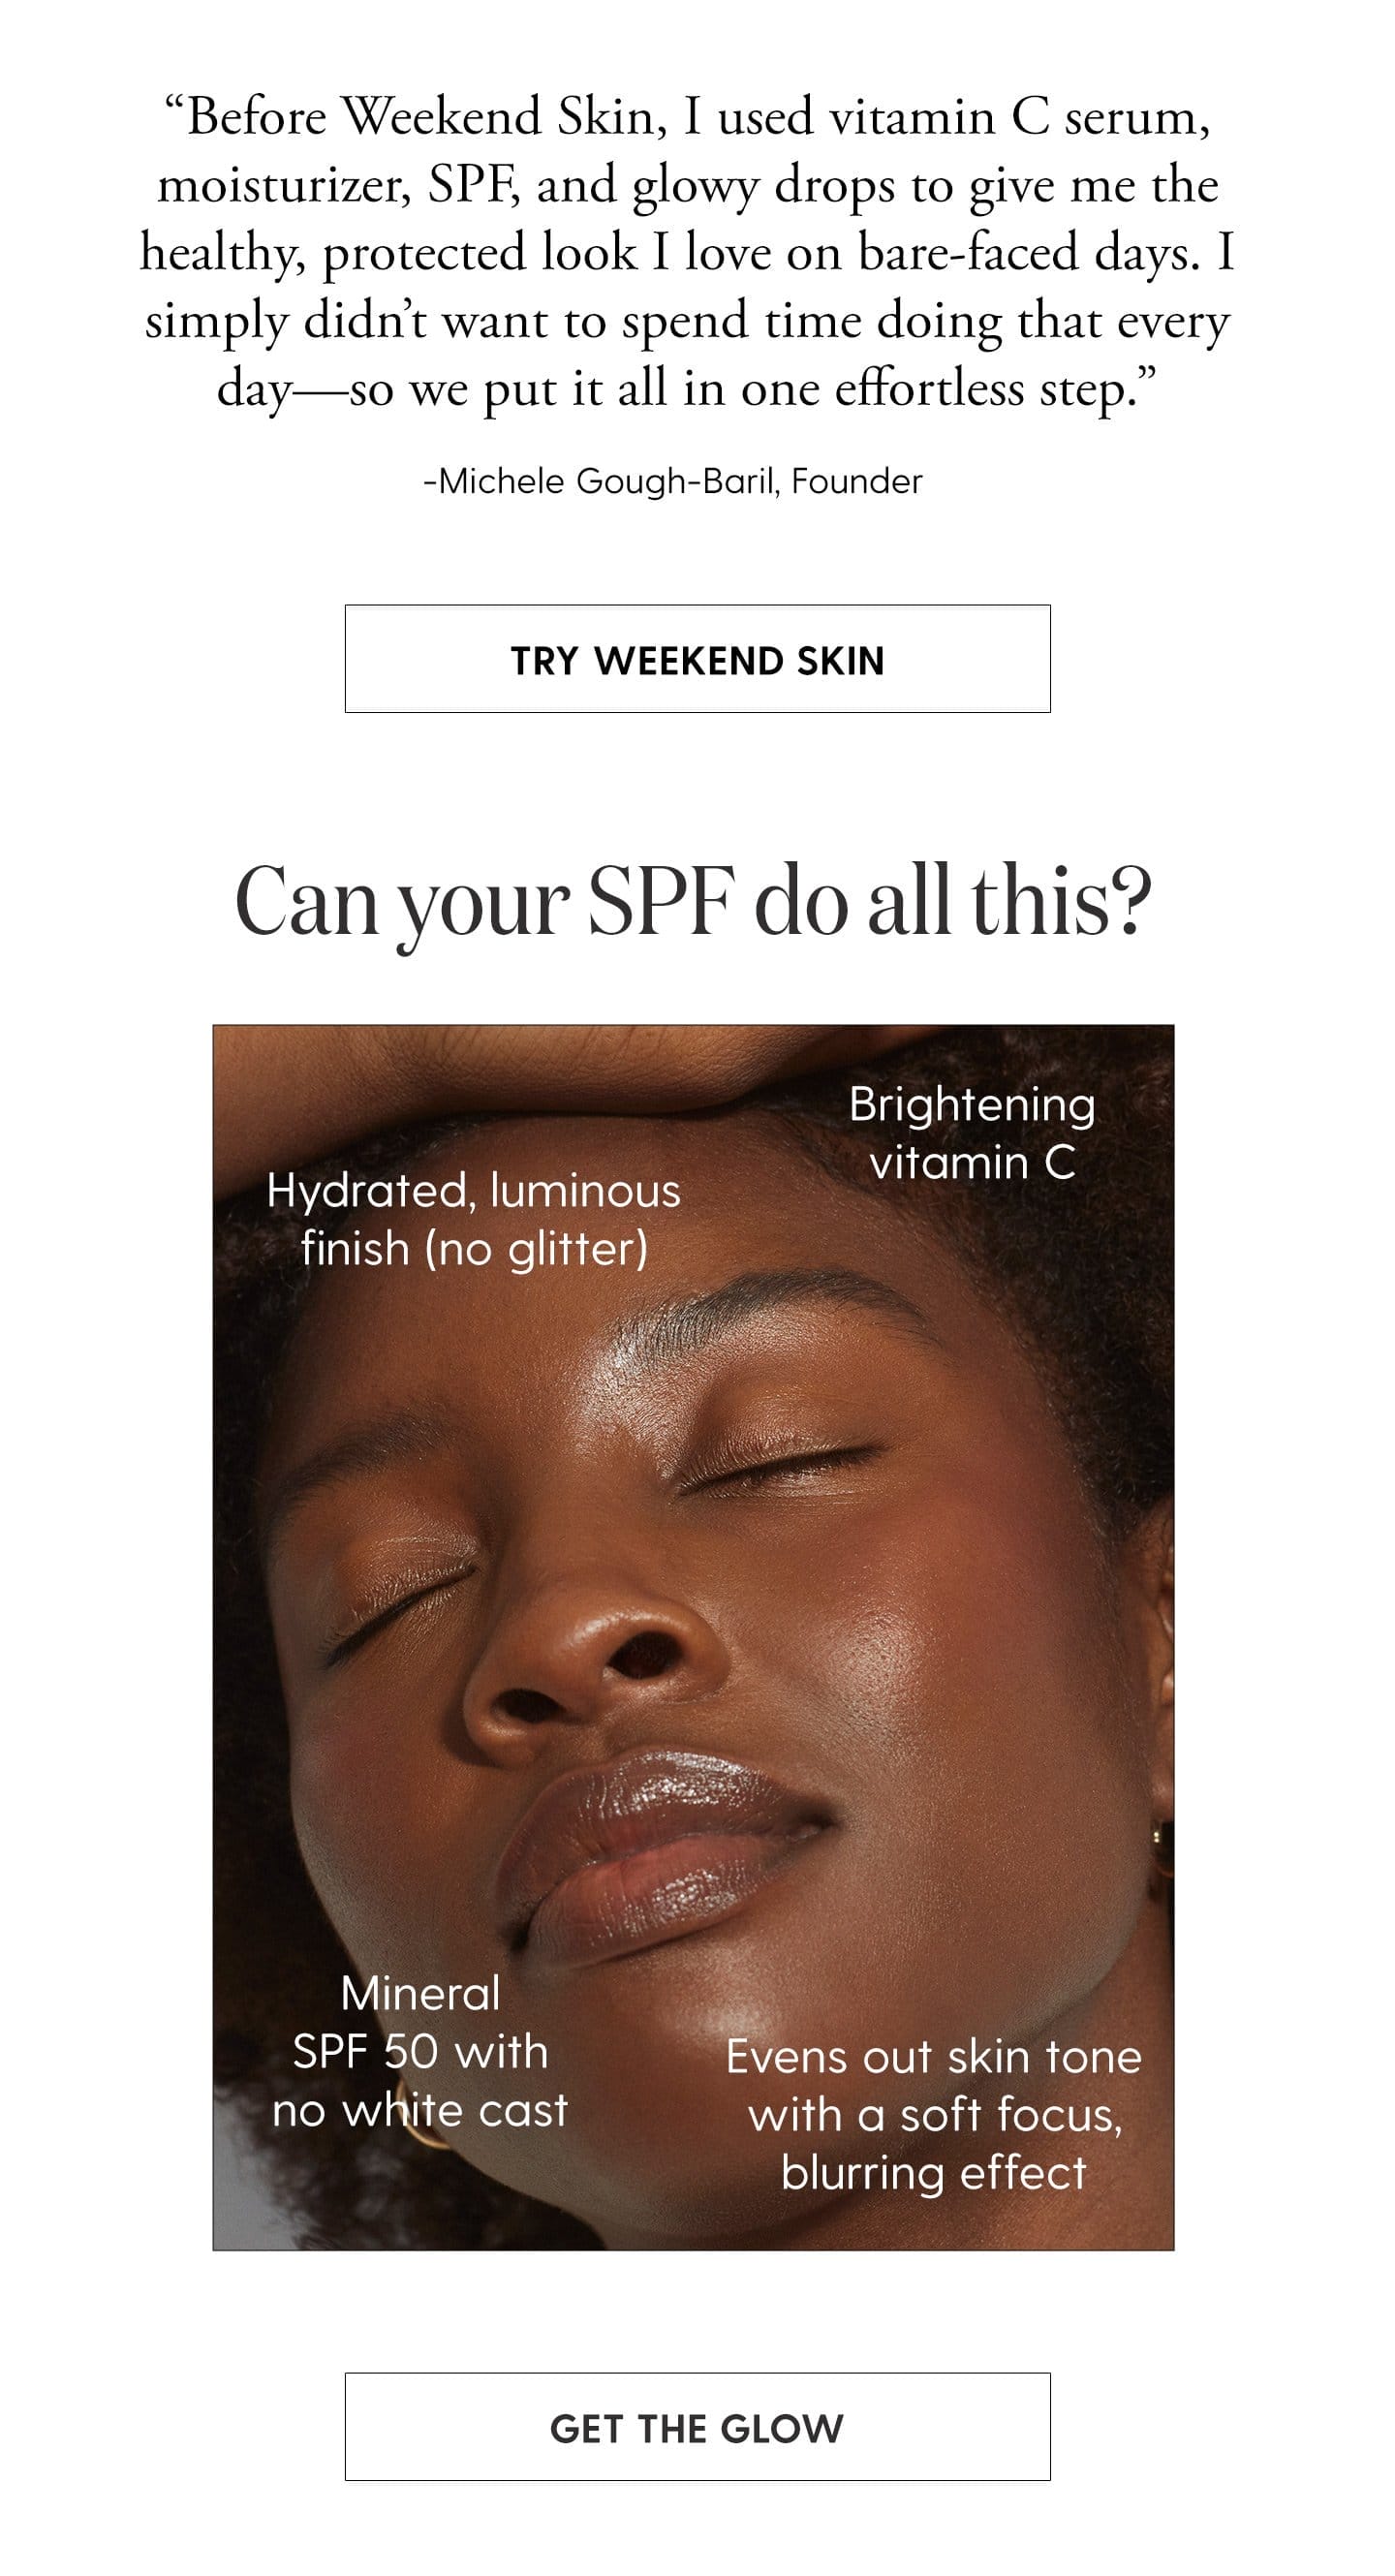 Can your SPF do all this?